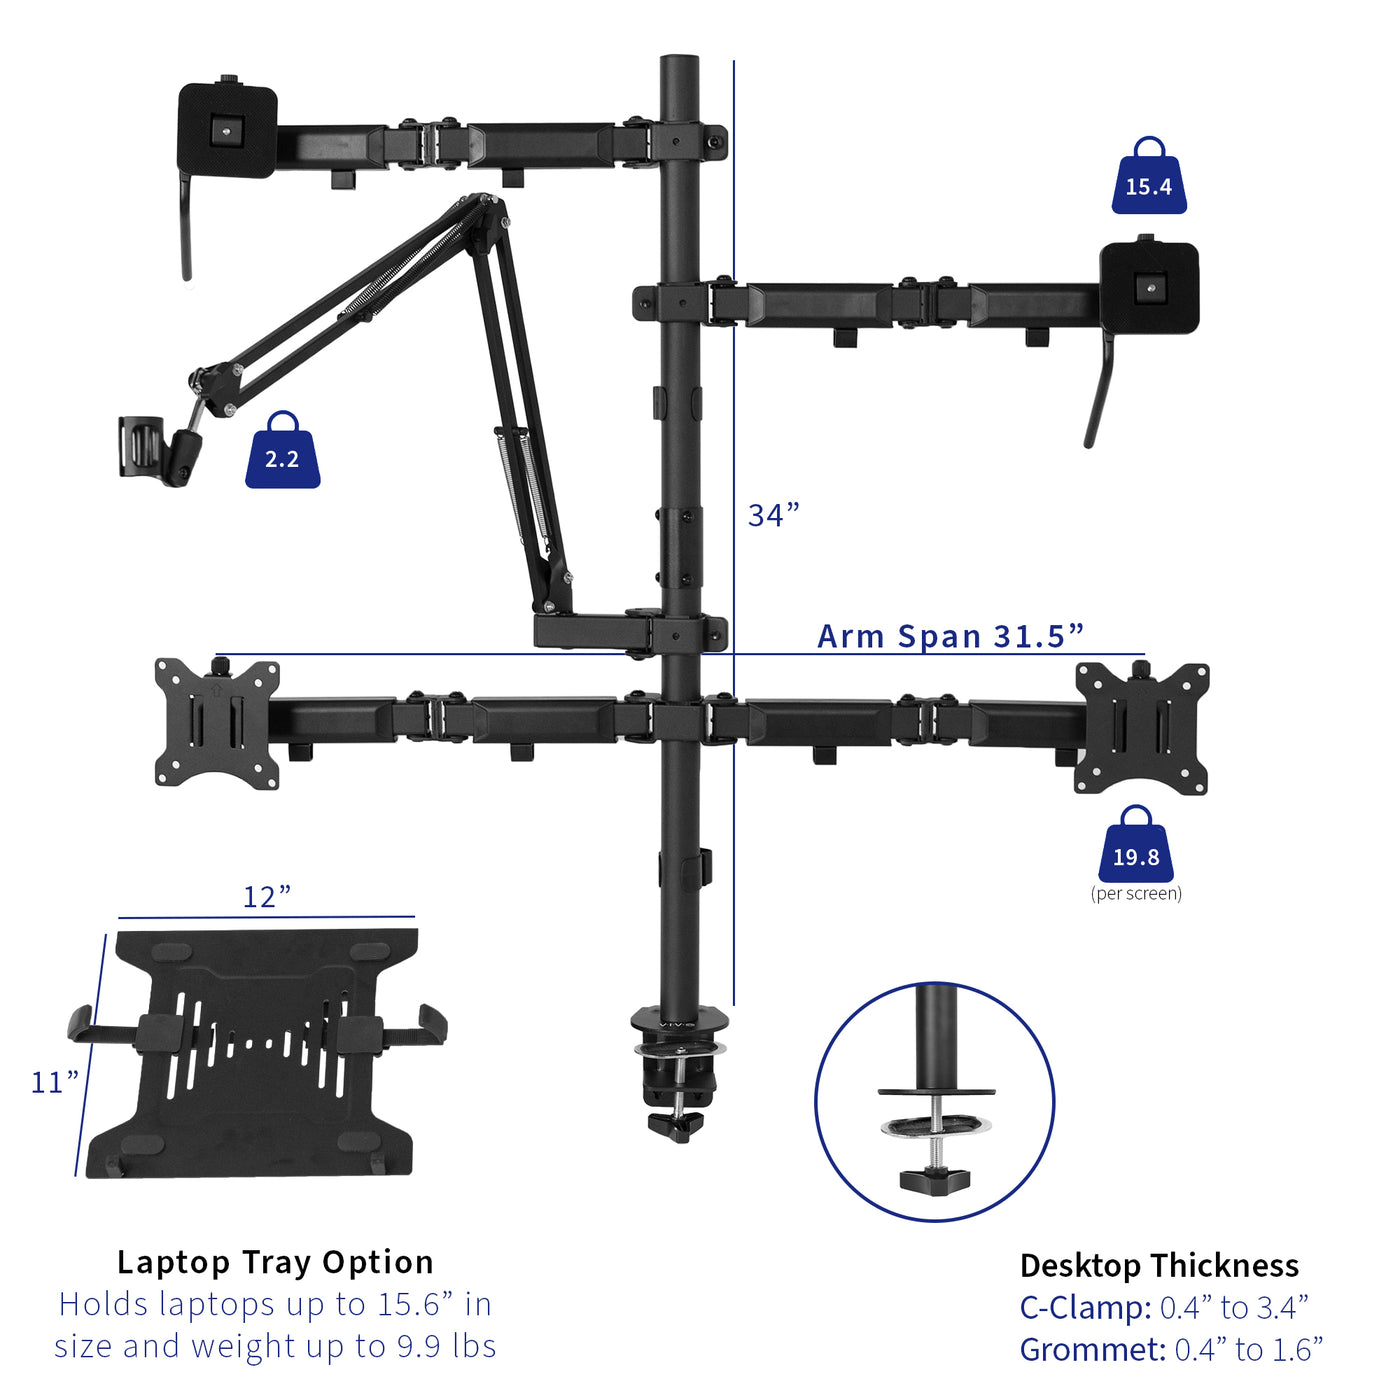 Clamp and grommet compatibility measurements to ensure this multi-arm mount will attach to your desk.